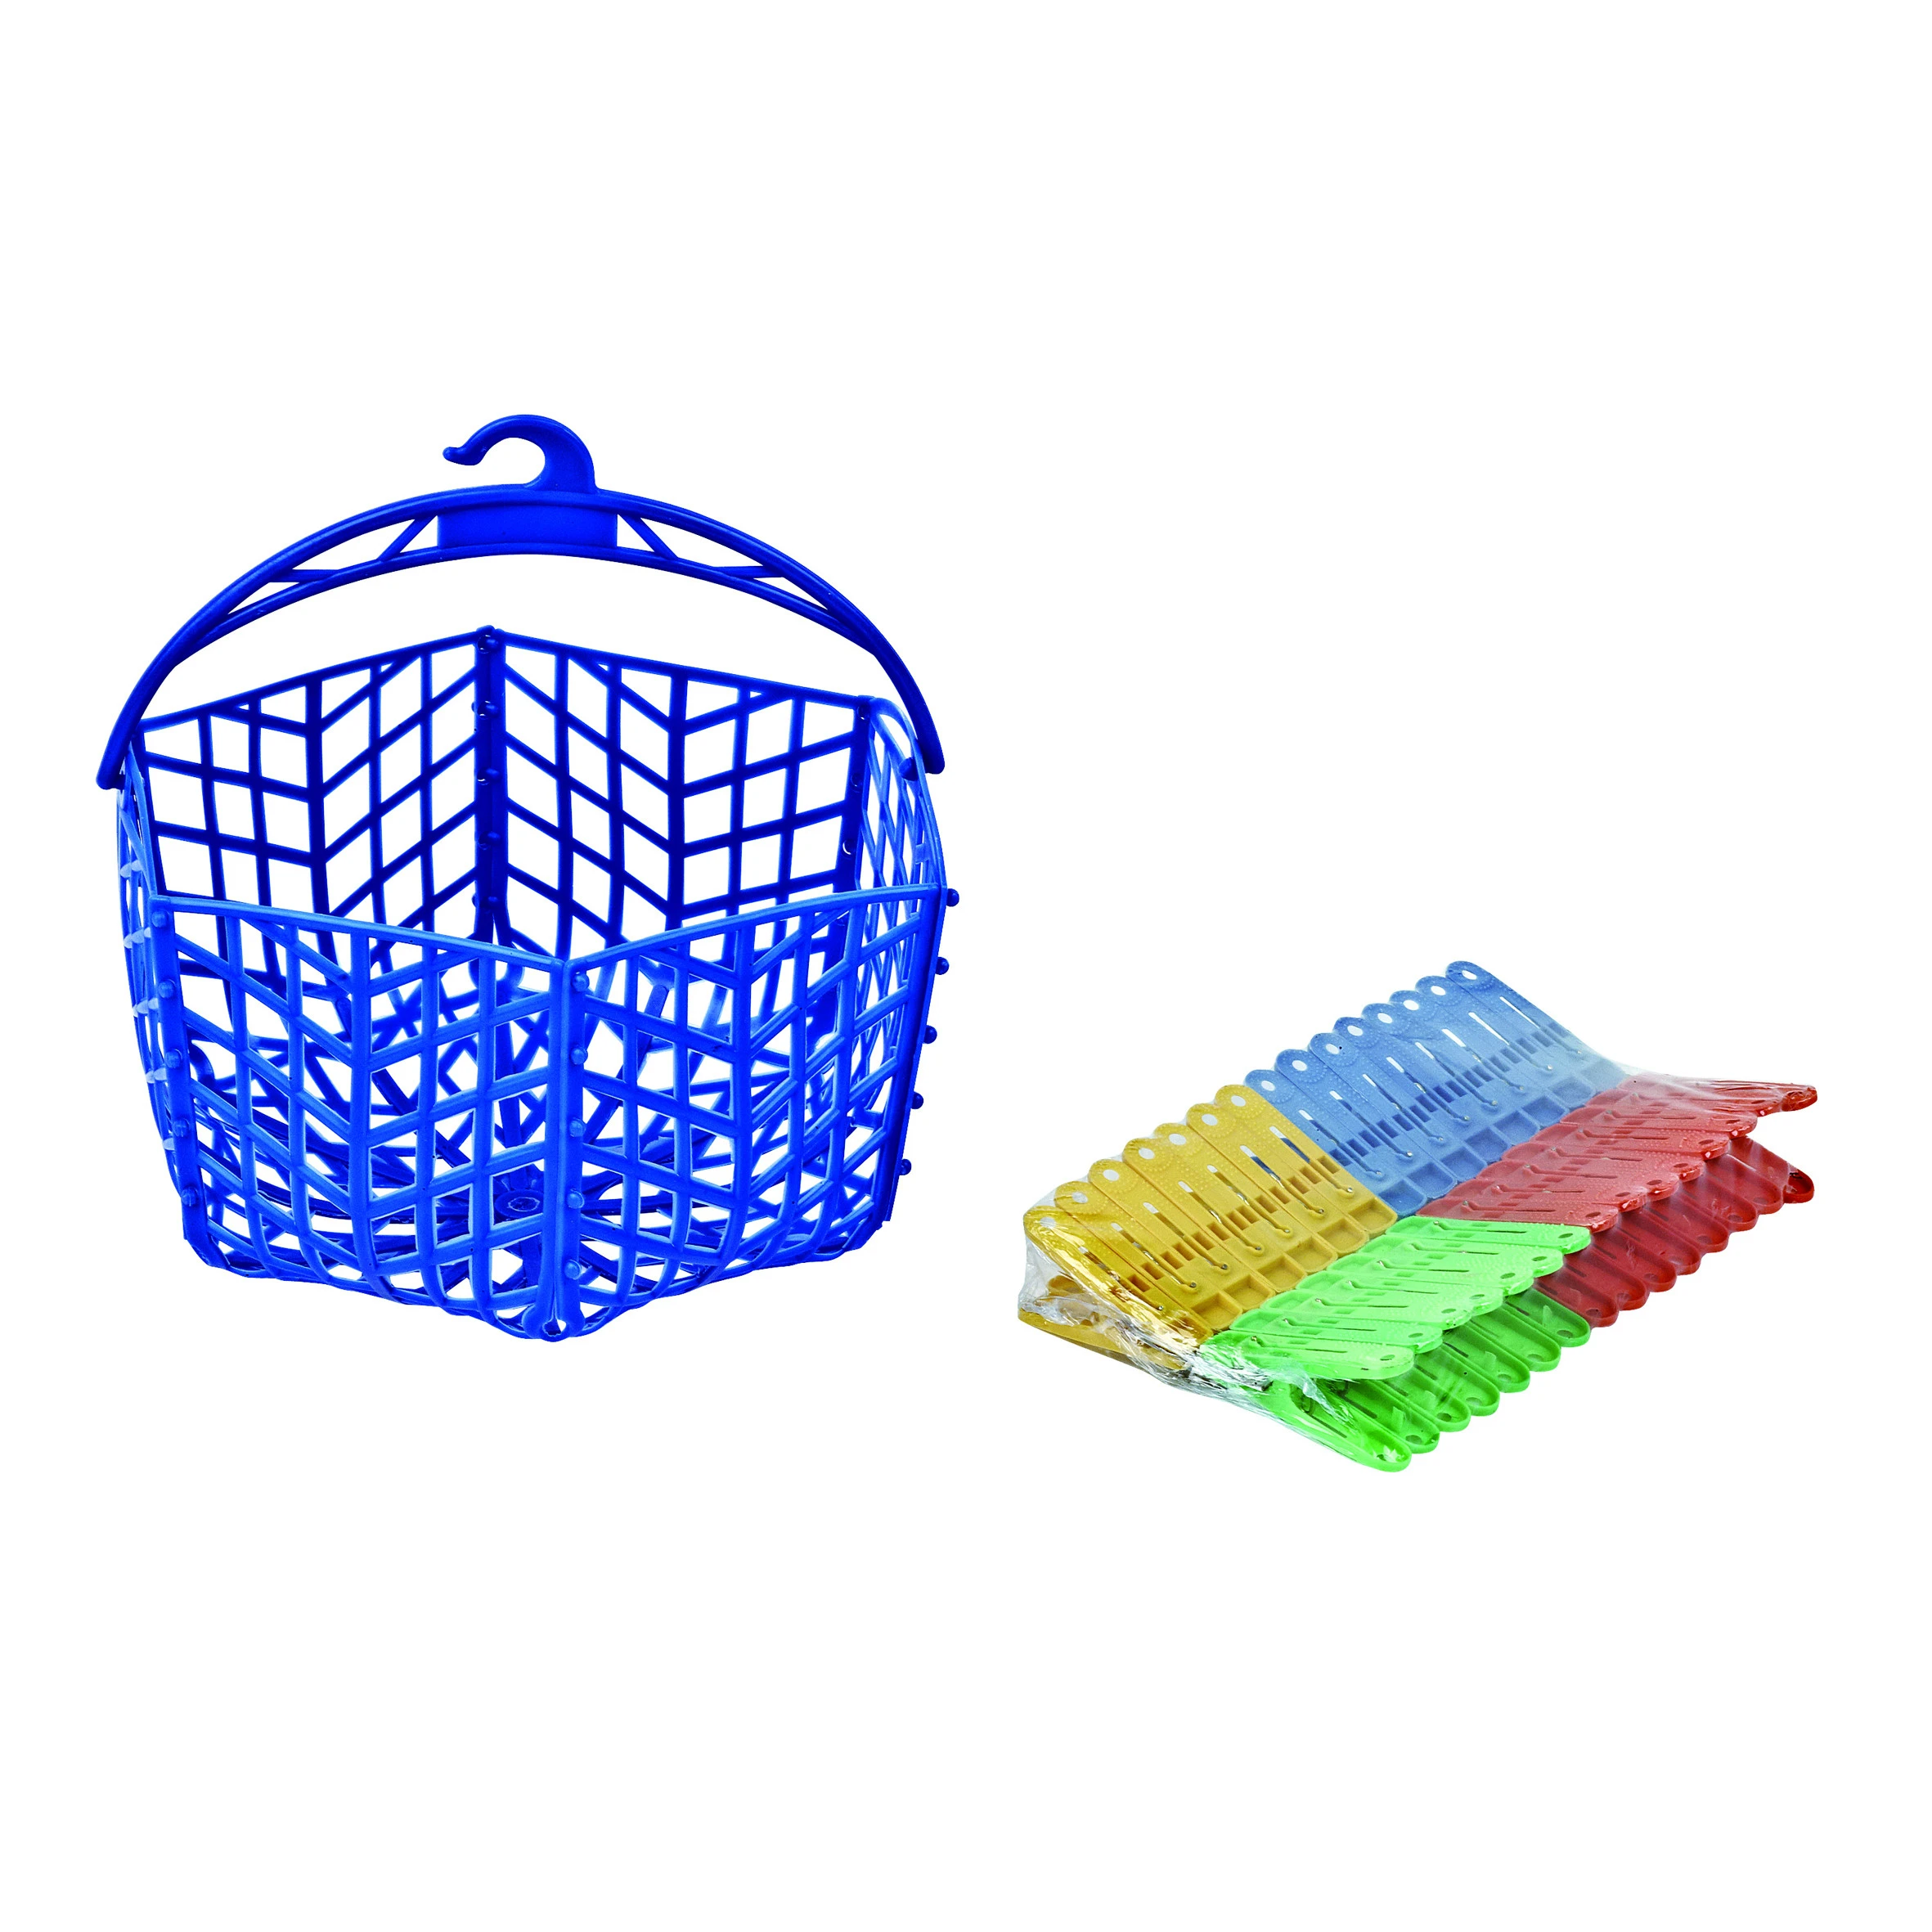 20m steel drying rack with laundry hanger basket and pegs